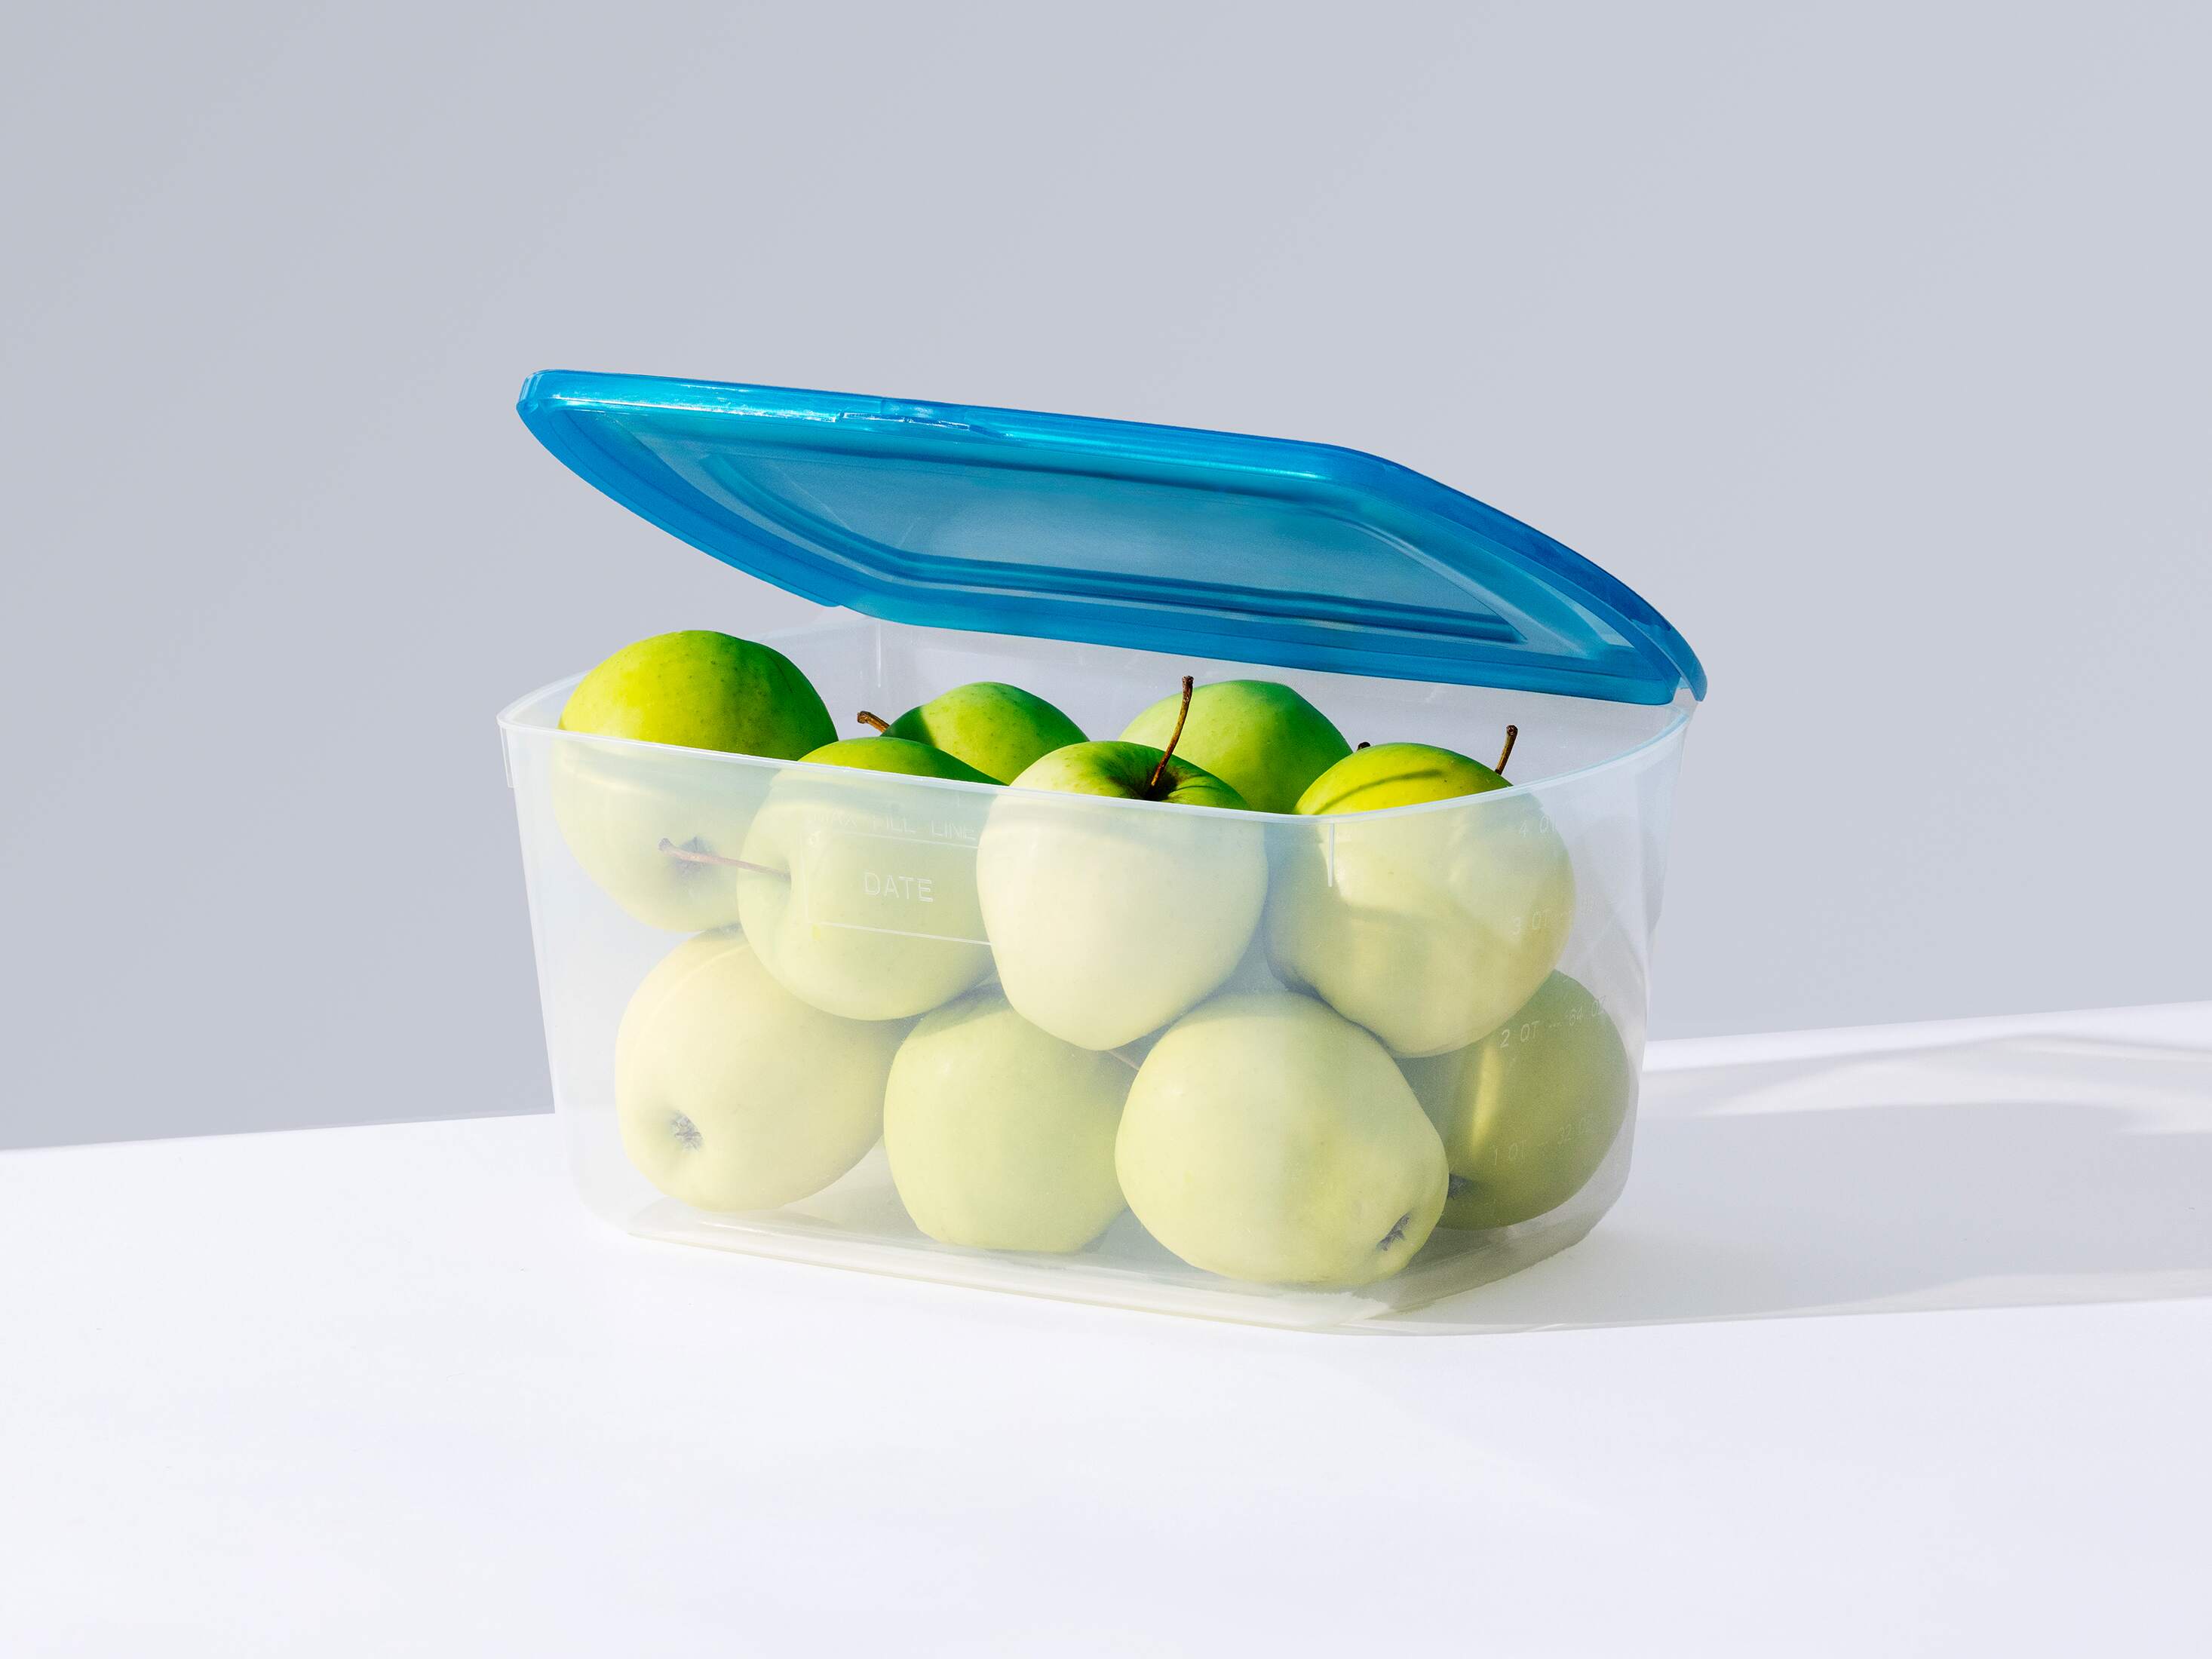 Mr. Lid Premium Attached Storage Containers